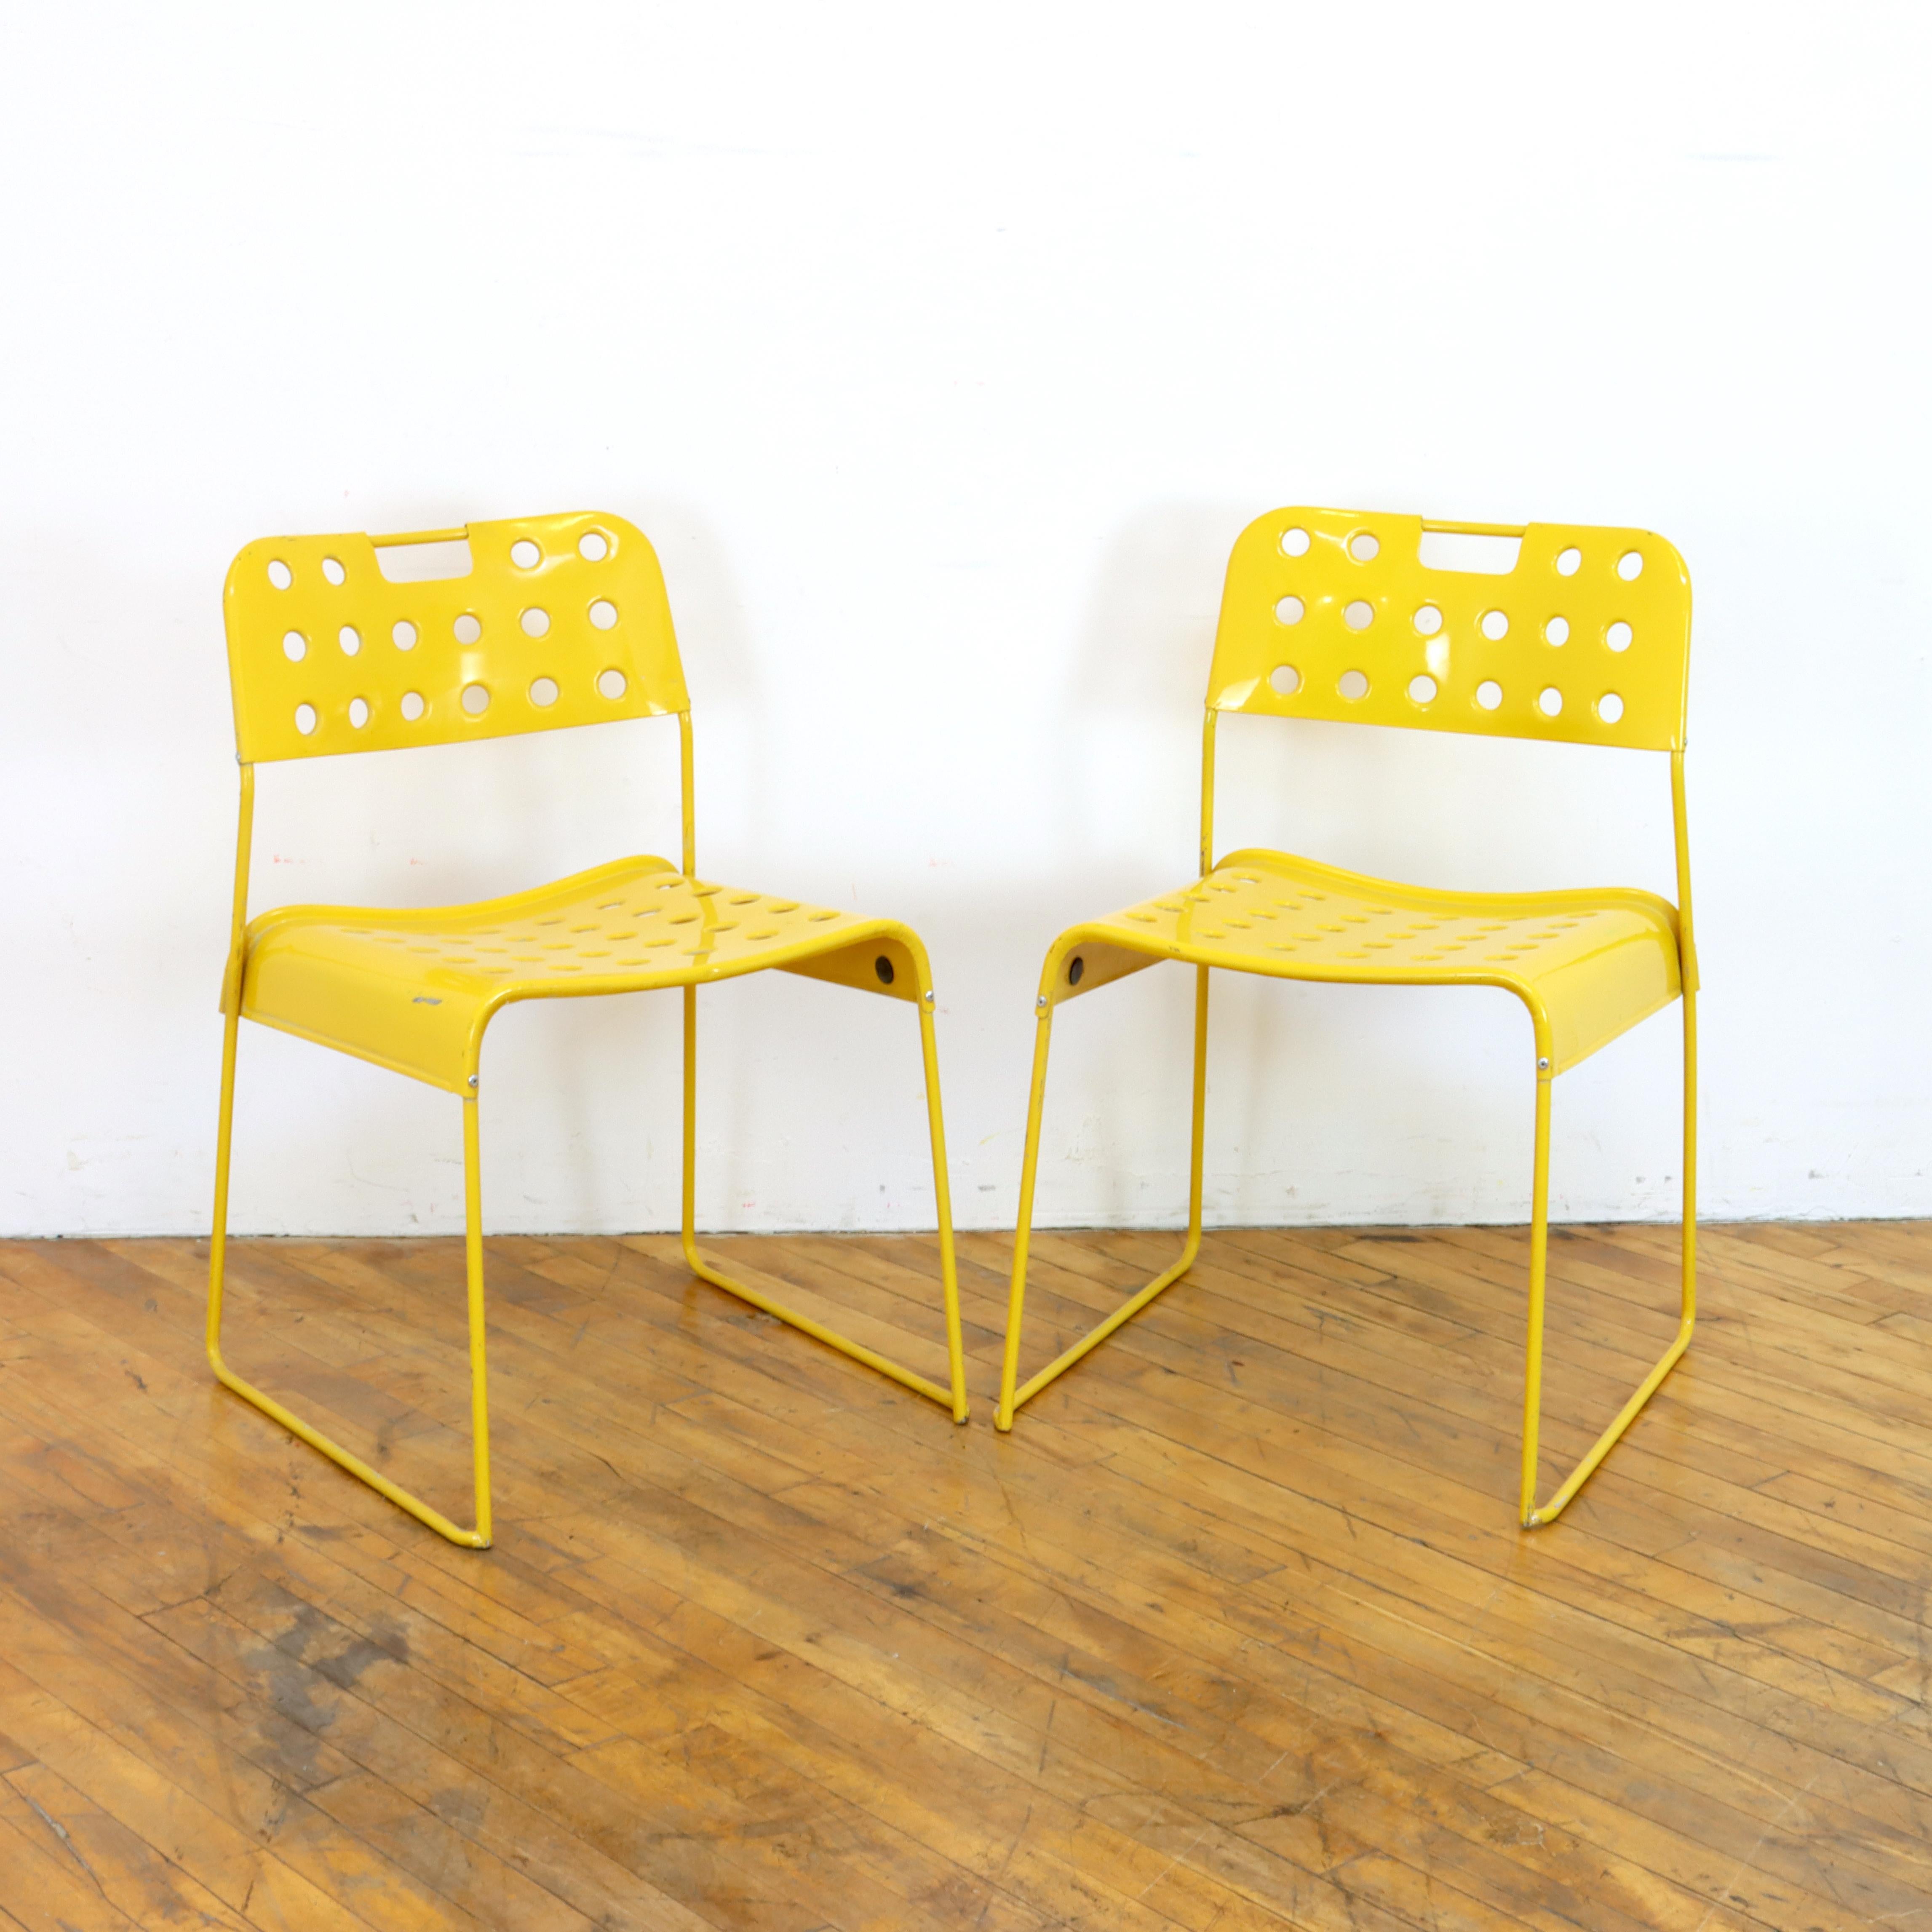 Pair of vintage 1970s Omkstak chairs in yellow by Rodney Kingsman for Bieffeplast. Wire frame and perforated 
metal seat and back. Can be used inside or out.  

18.5” W x 18” D x 30” H
Seat Height: 18”
